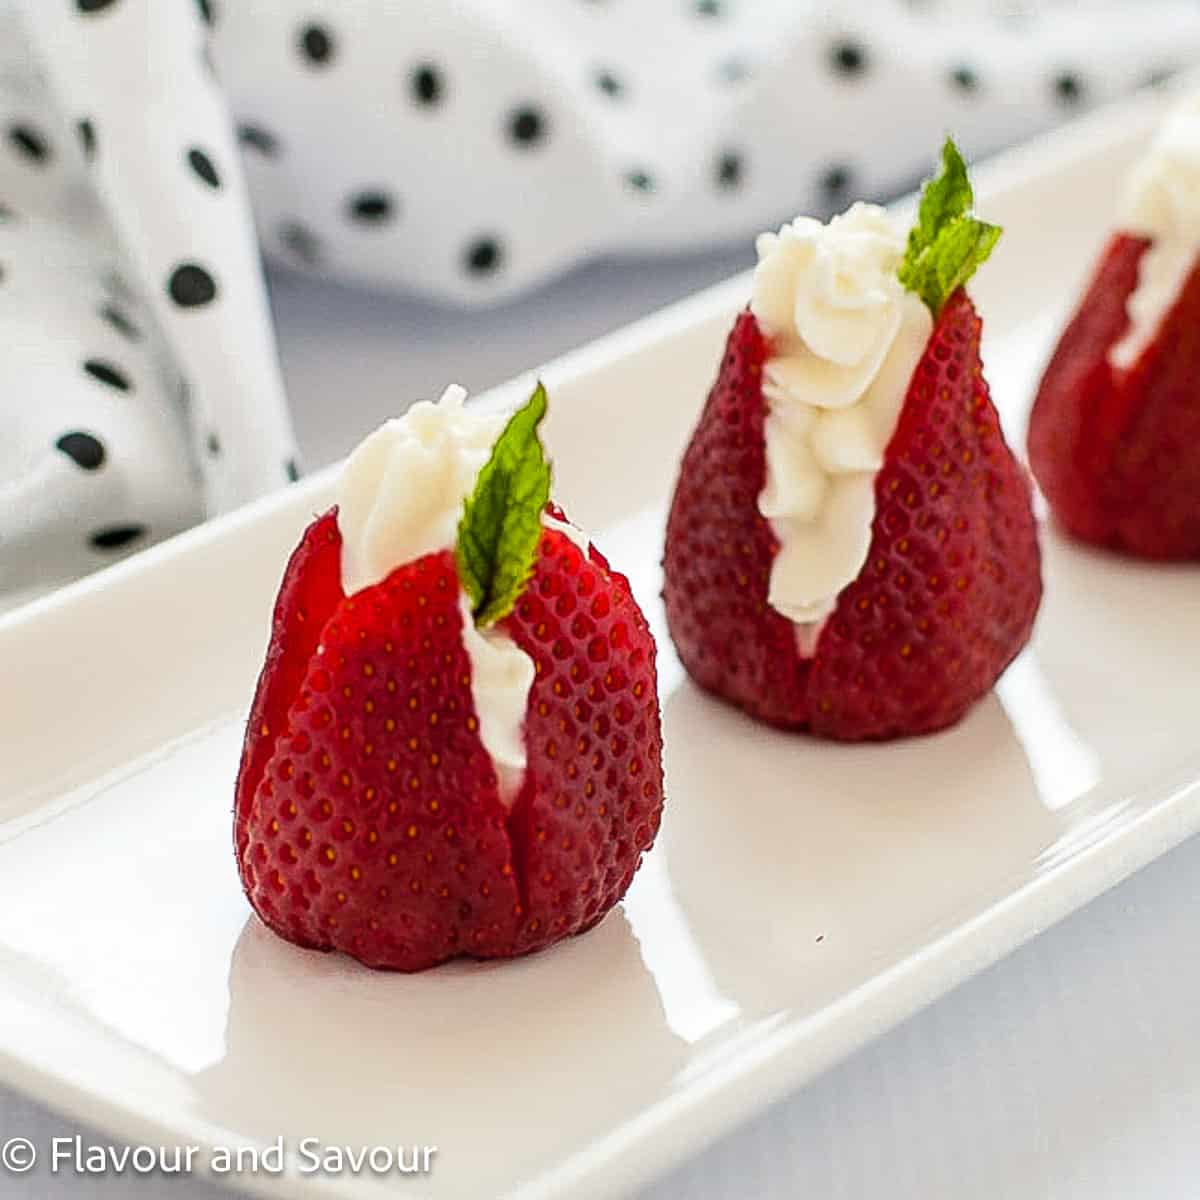 Strawberries stuffed with goat cheese and garnished with a mint leaf.